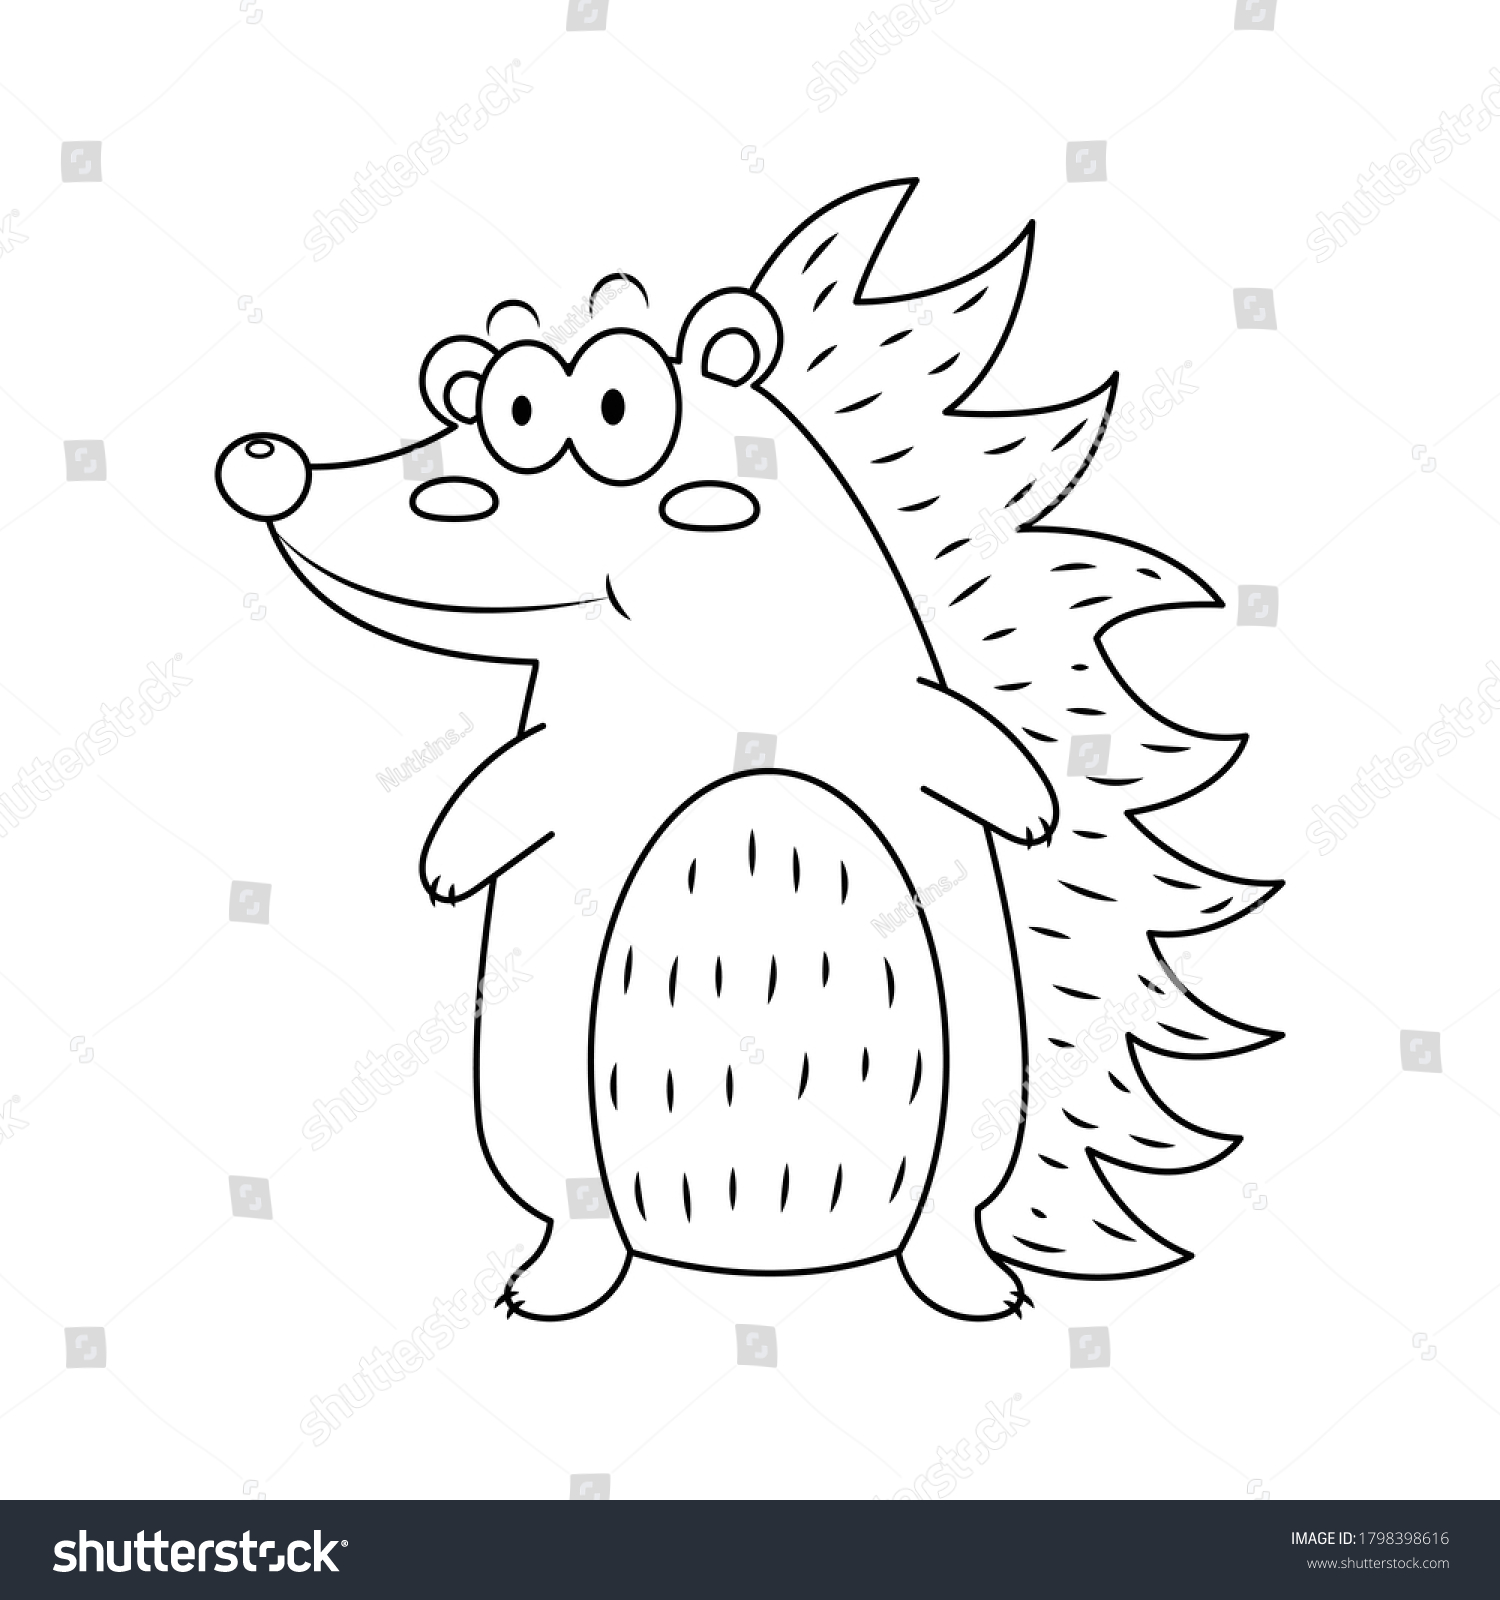 Porcupine Vector Illustration Cartoon Isolated On Stock Vector Royalty Free 1798398616 